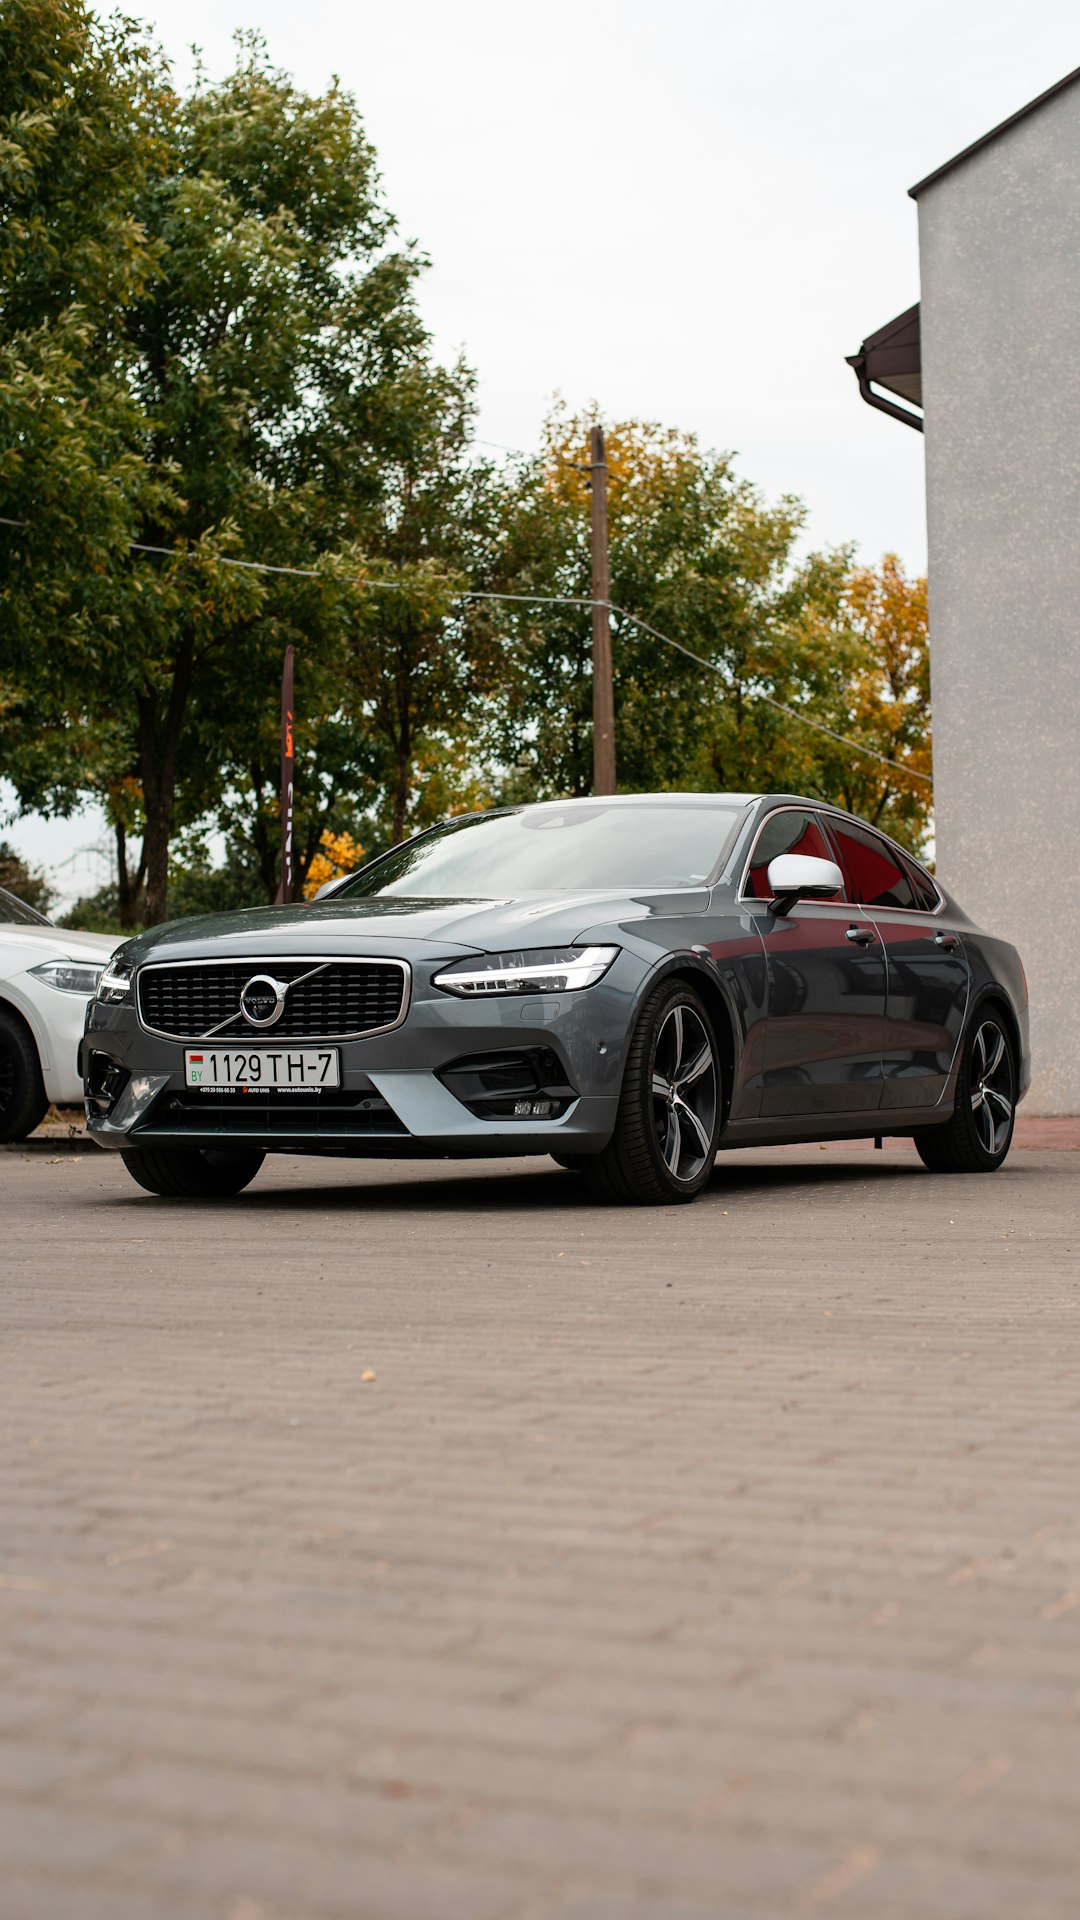 The Volvo XC40 Recharge is an all-electric SUV that combines stylish design, impressive performance, and zero tailpipe emissions.